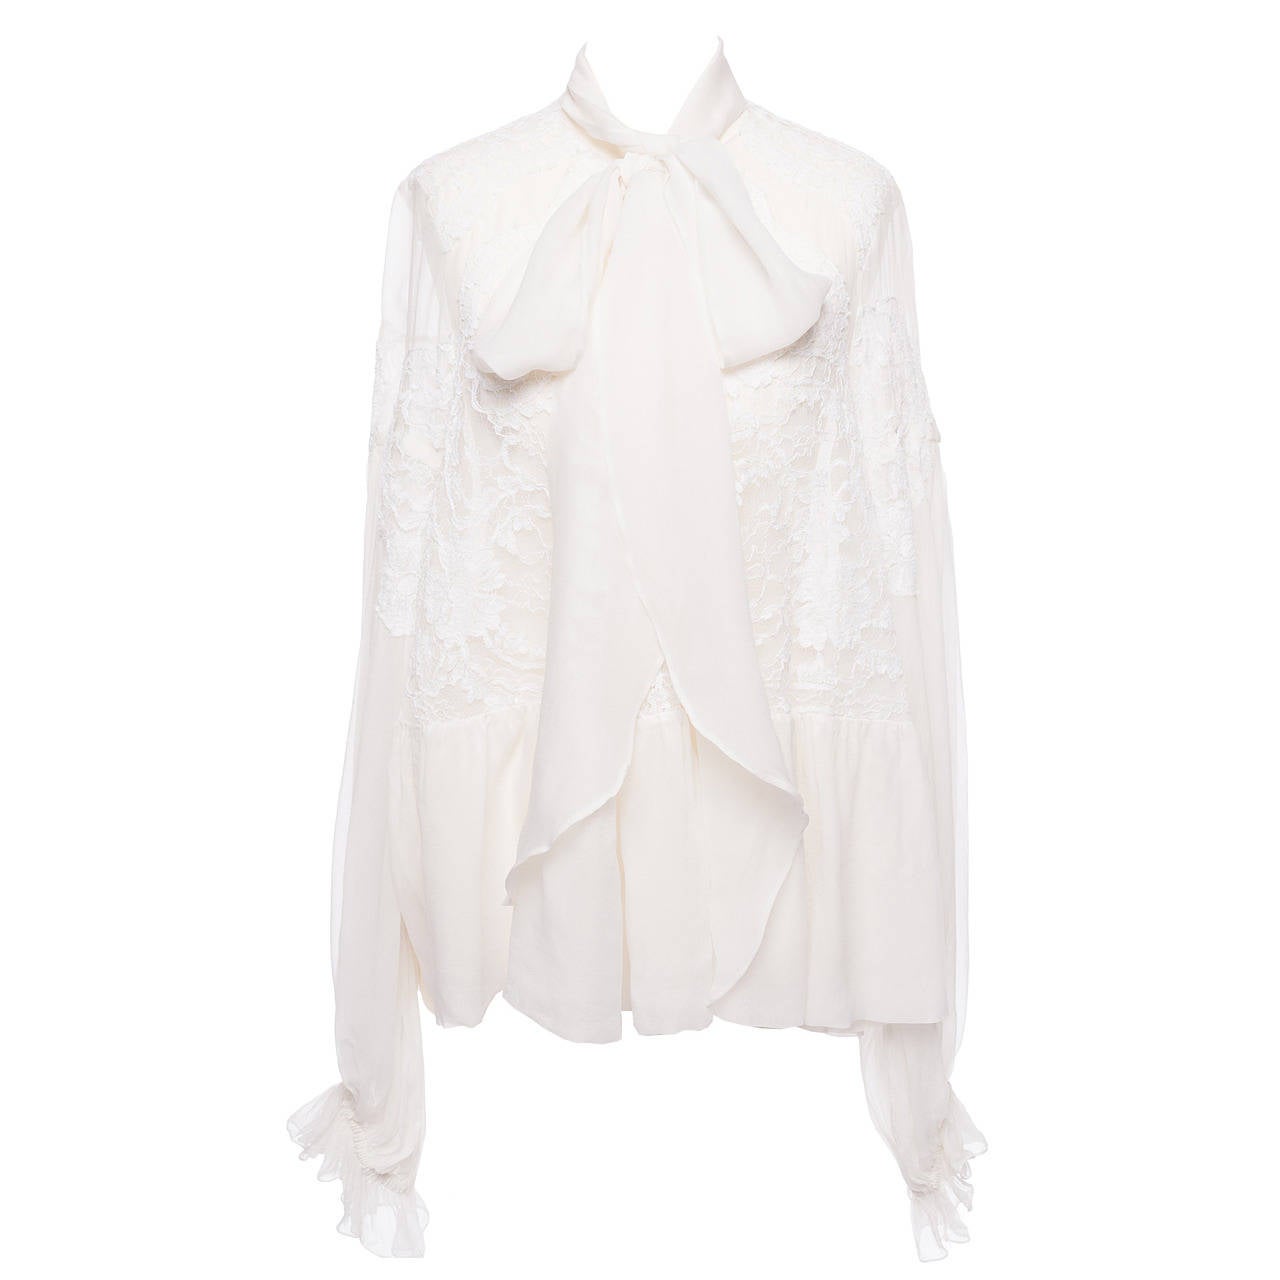 Givenchy by Ricardo Tisci silk and lace peasant blouse, Sz. M